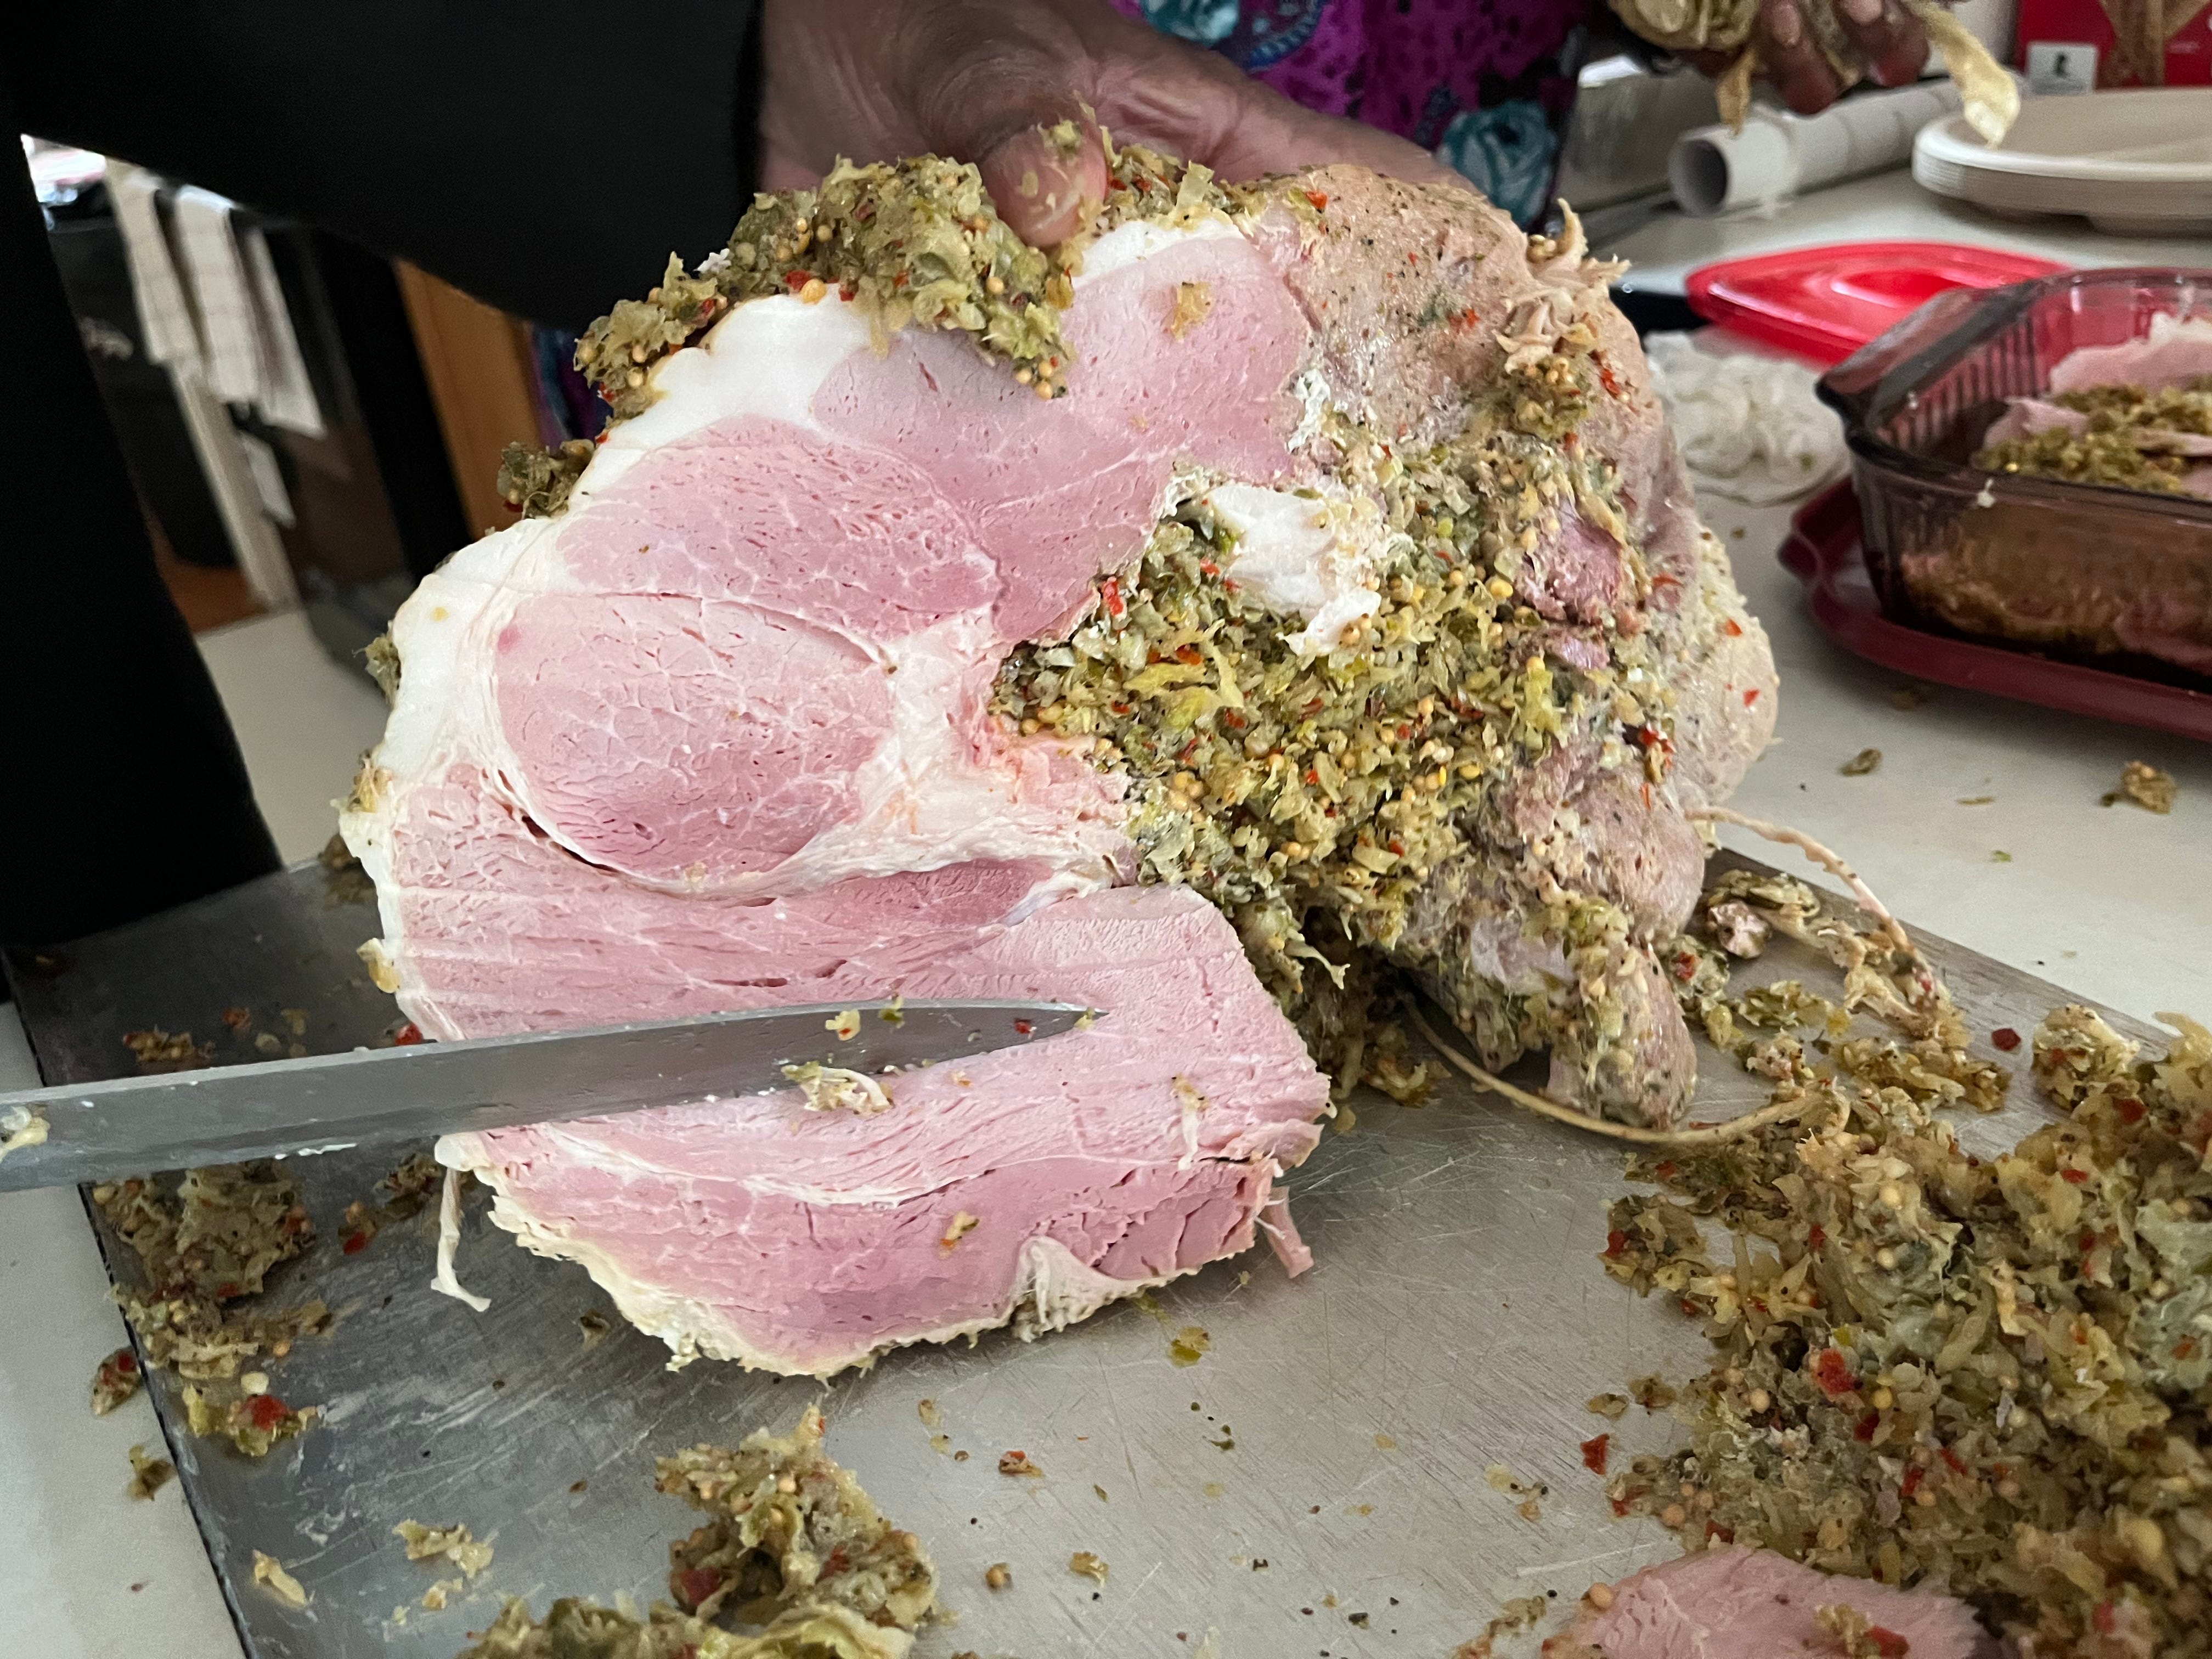 Easter dinner isn't complete without stuffed ham for seven generations of this Maryland family thumbnail